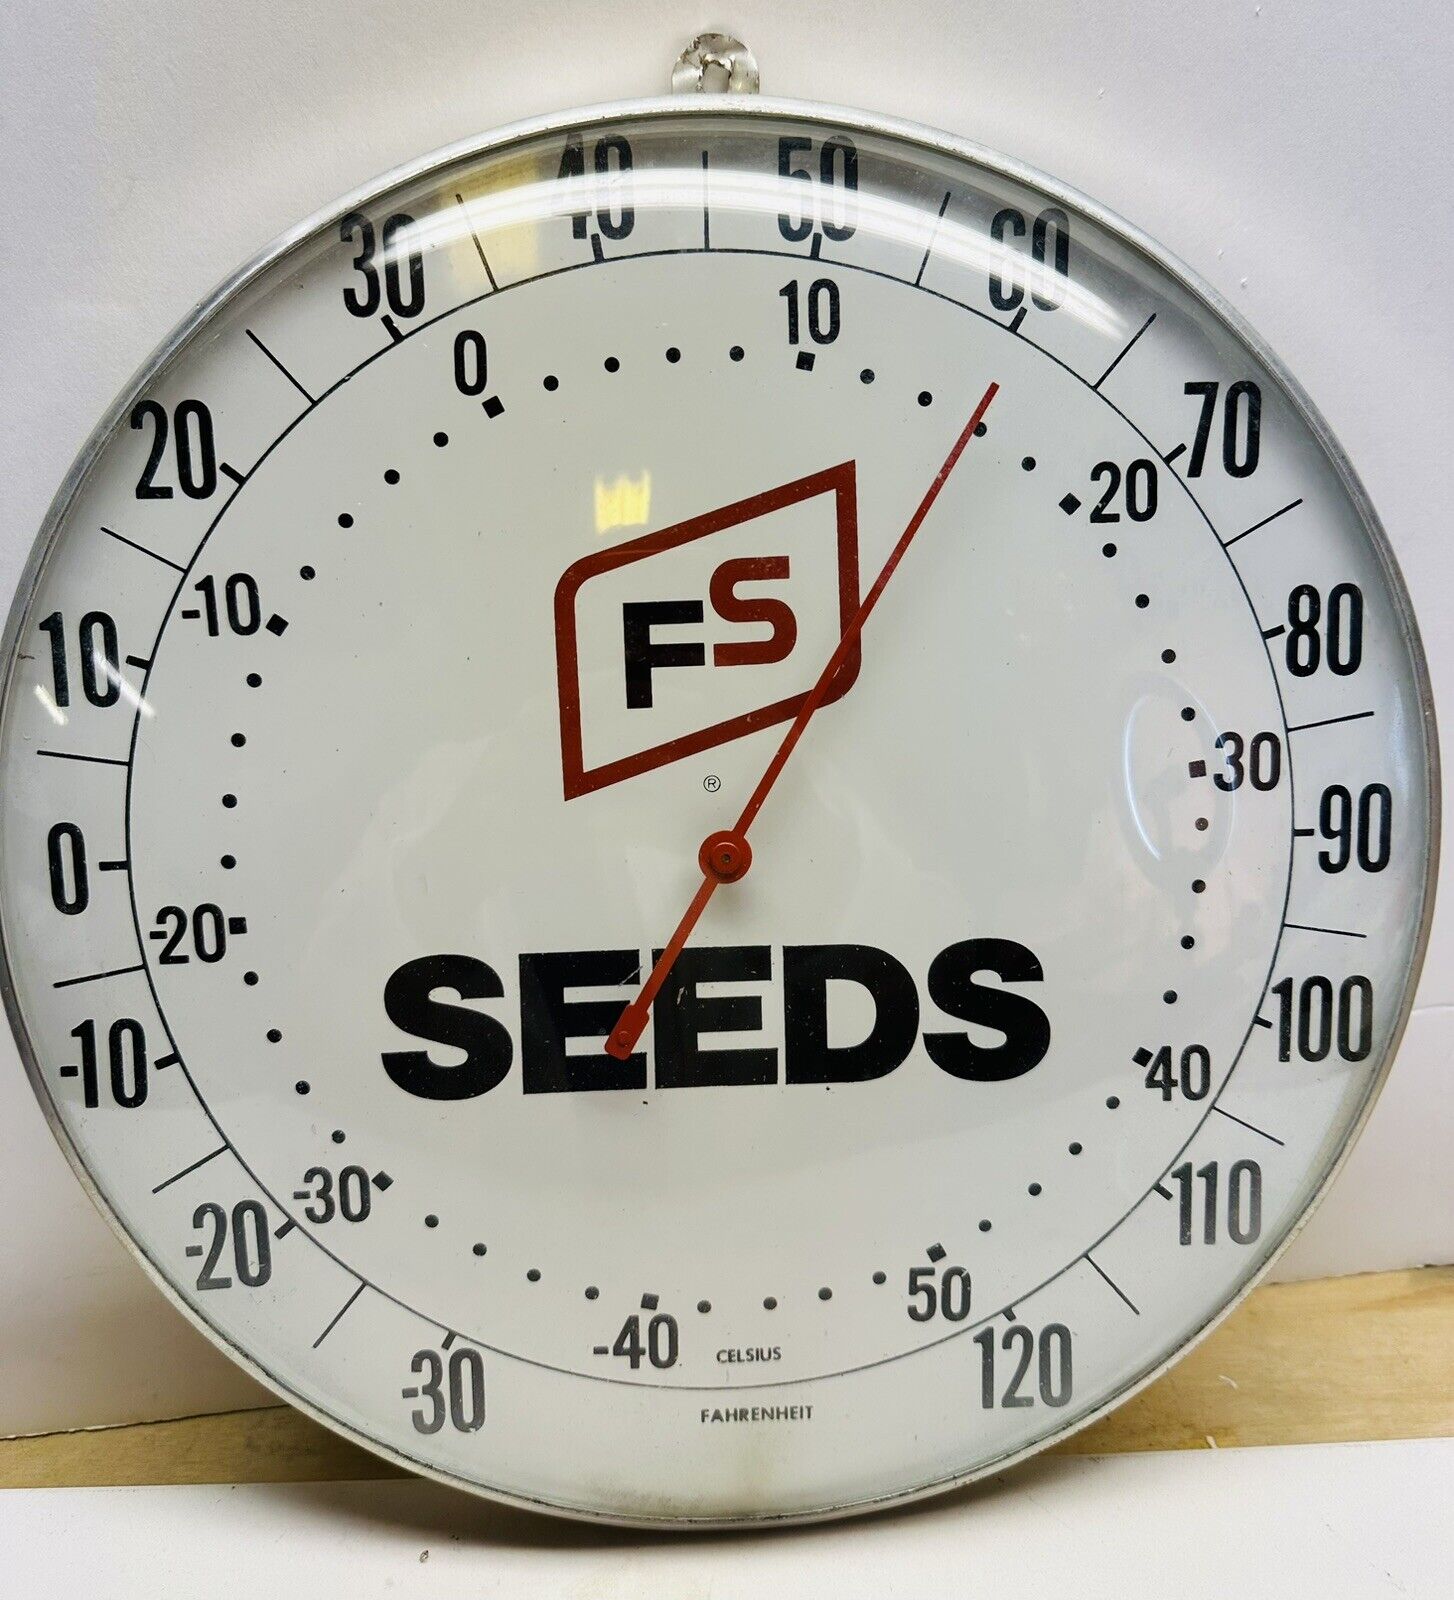 FS Seeds Farmers Services Farm Supply 11.5” Thermometer